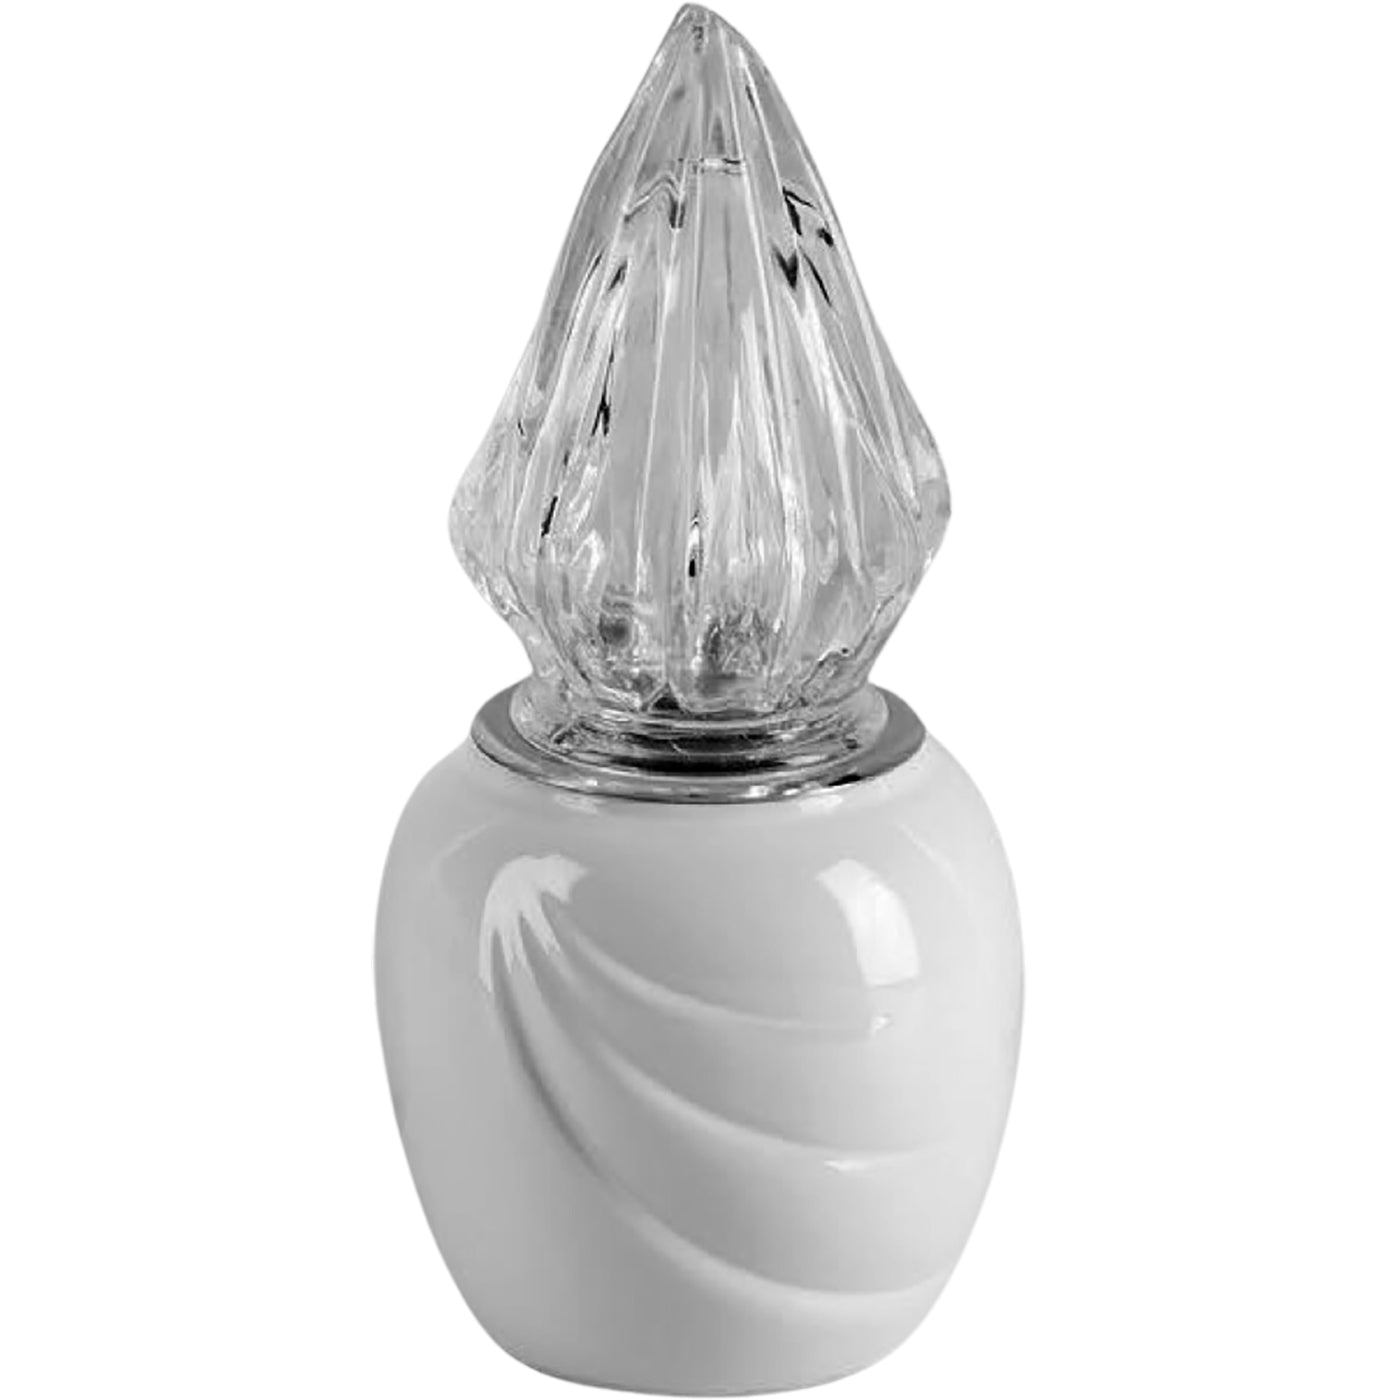 Grave light Ecotre 10x10cm - 3.9x3.9in In white porcelain, ground attached ECO152T